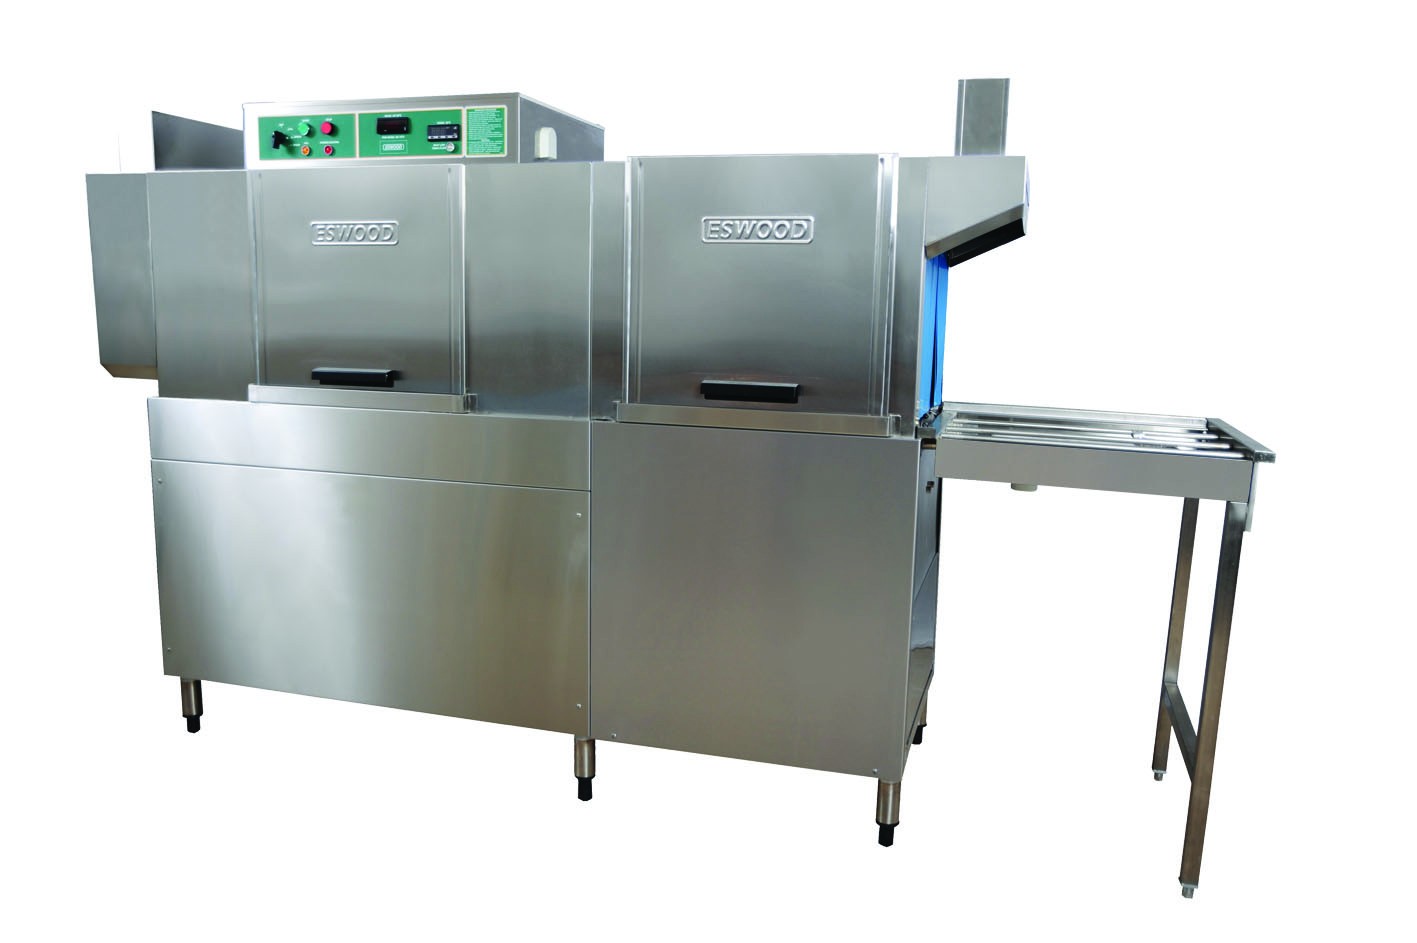 Tips for Buying Industrial Kitchen Equipment for Hotels